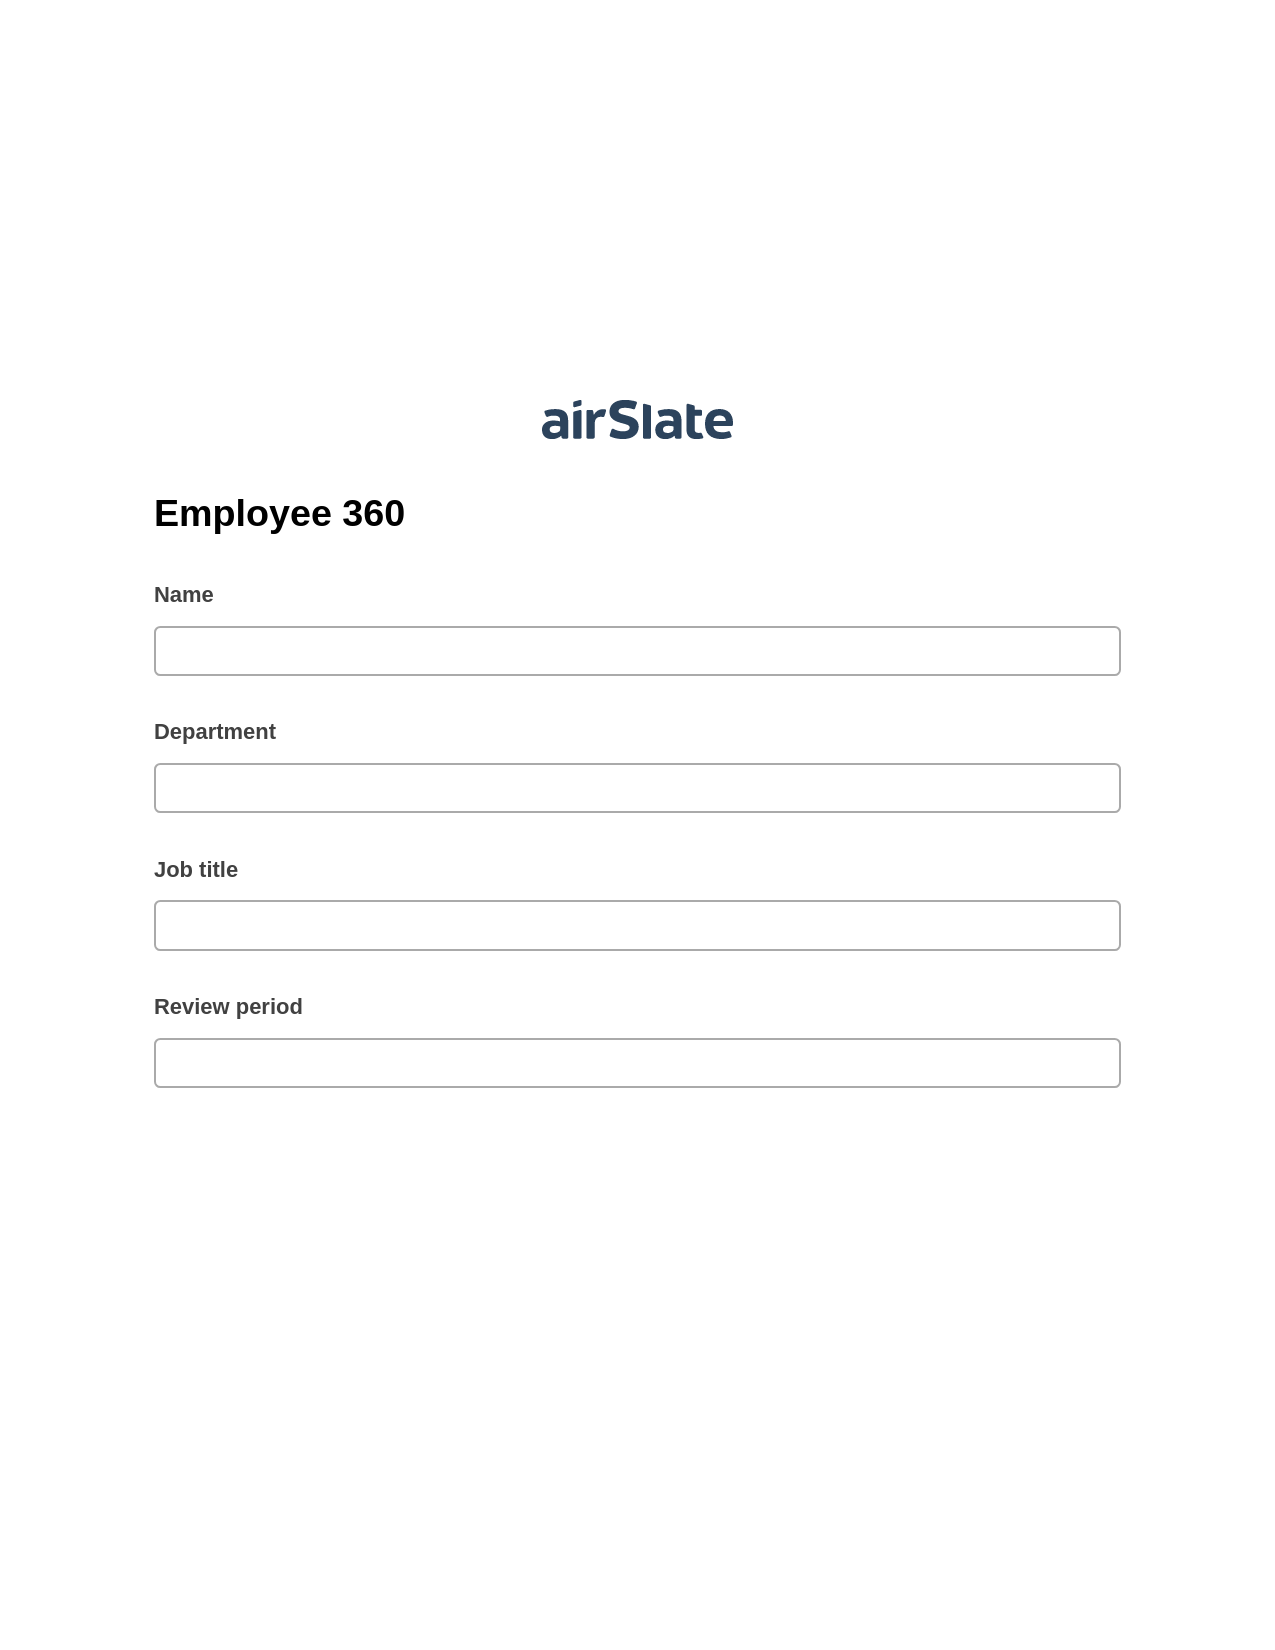 Multirole Employee 360 Pre-fill from MS Dynamics 365 Records, Create MS Dynamics 365 Records Bot, Archive to OneDrive Bot